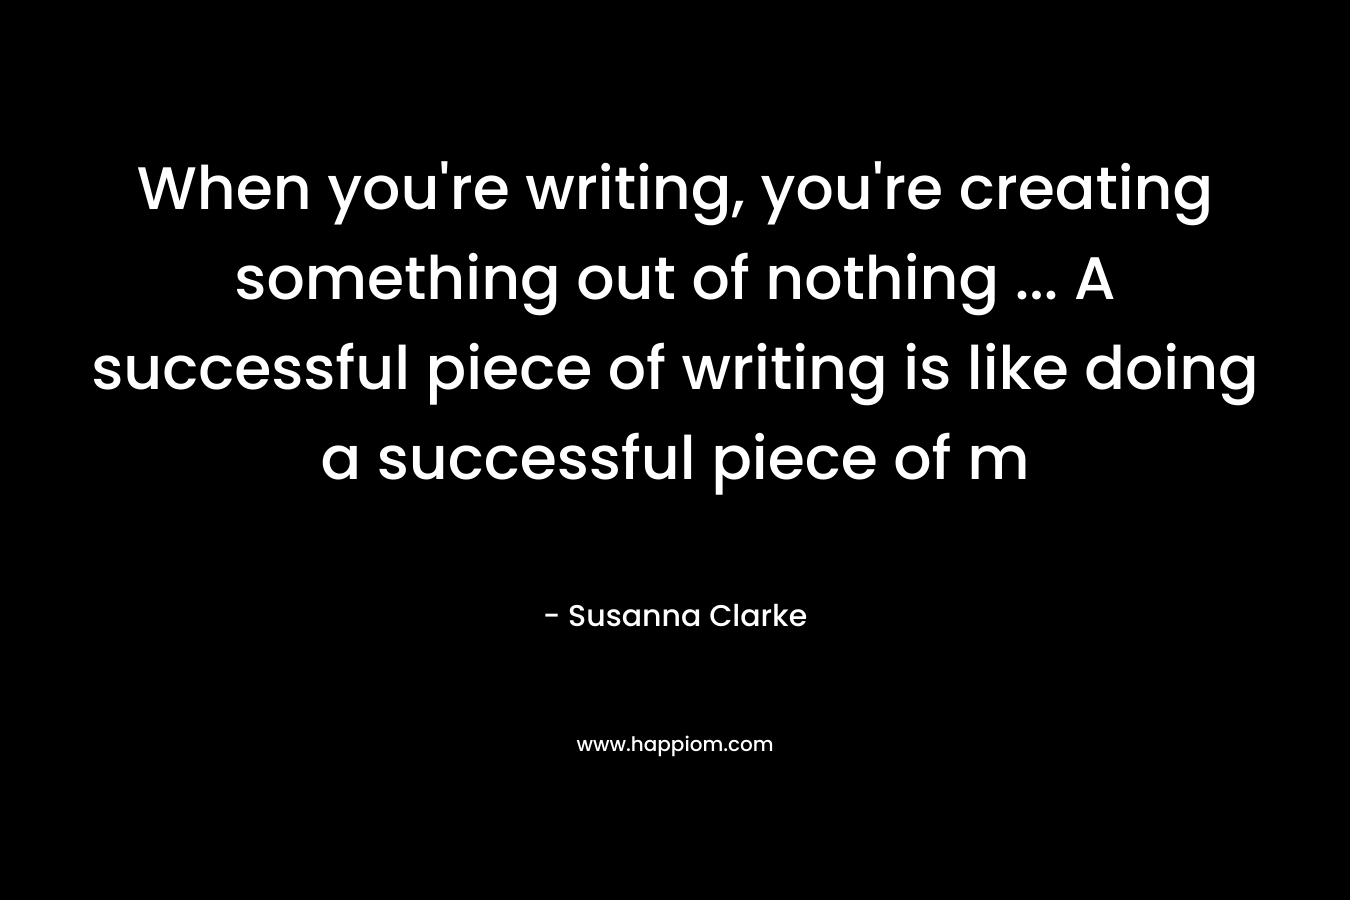 When you're writing, you're creating something out of nothing ... A successful piece of writing is like doing a successful piece of m